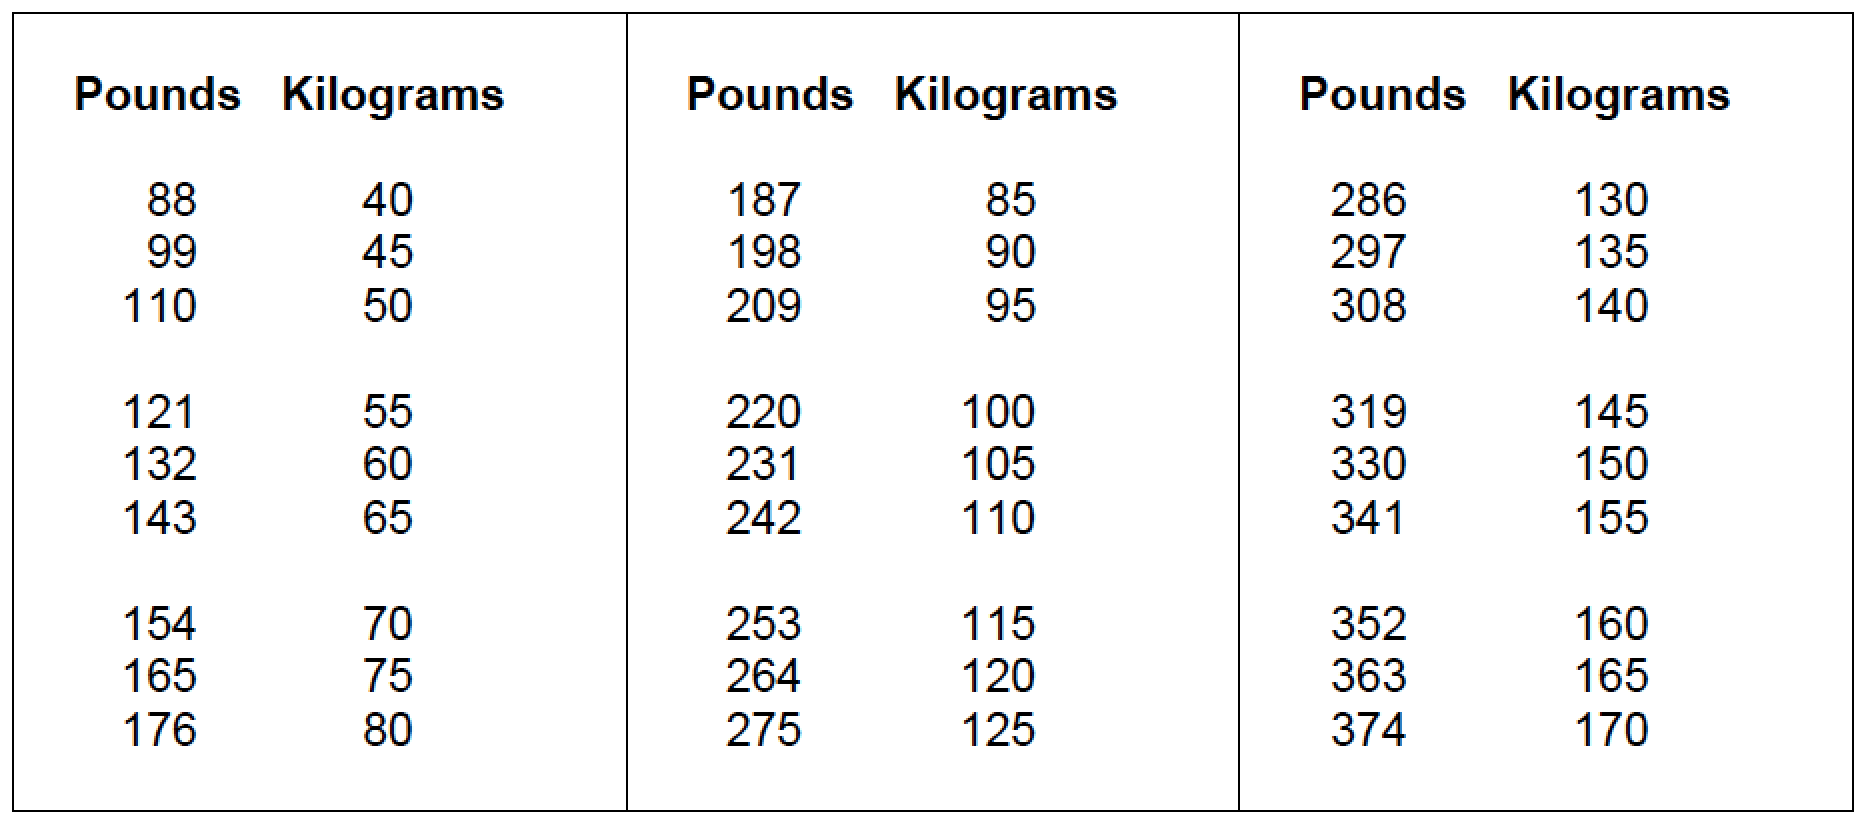 how many kilograms are in 165 pounds. 